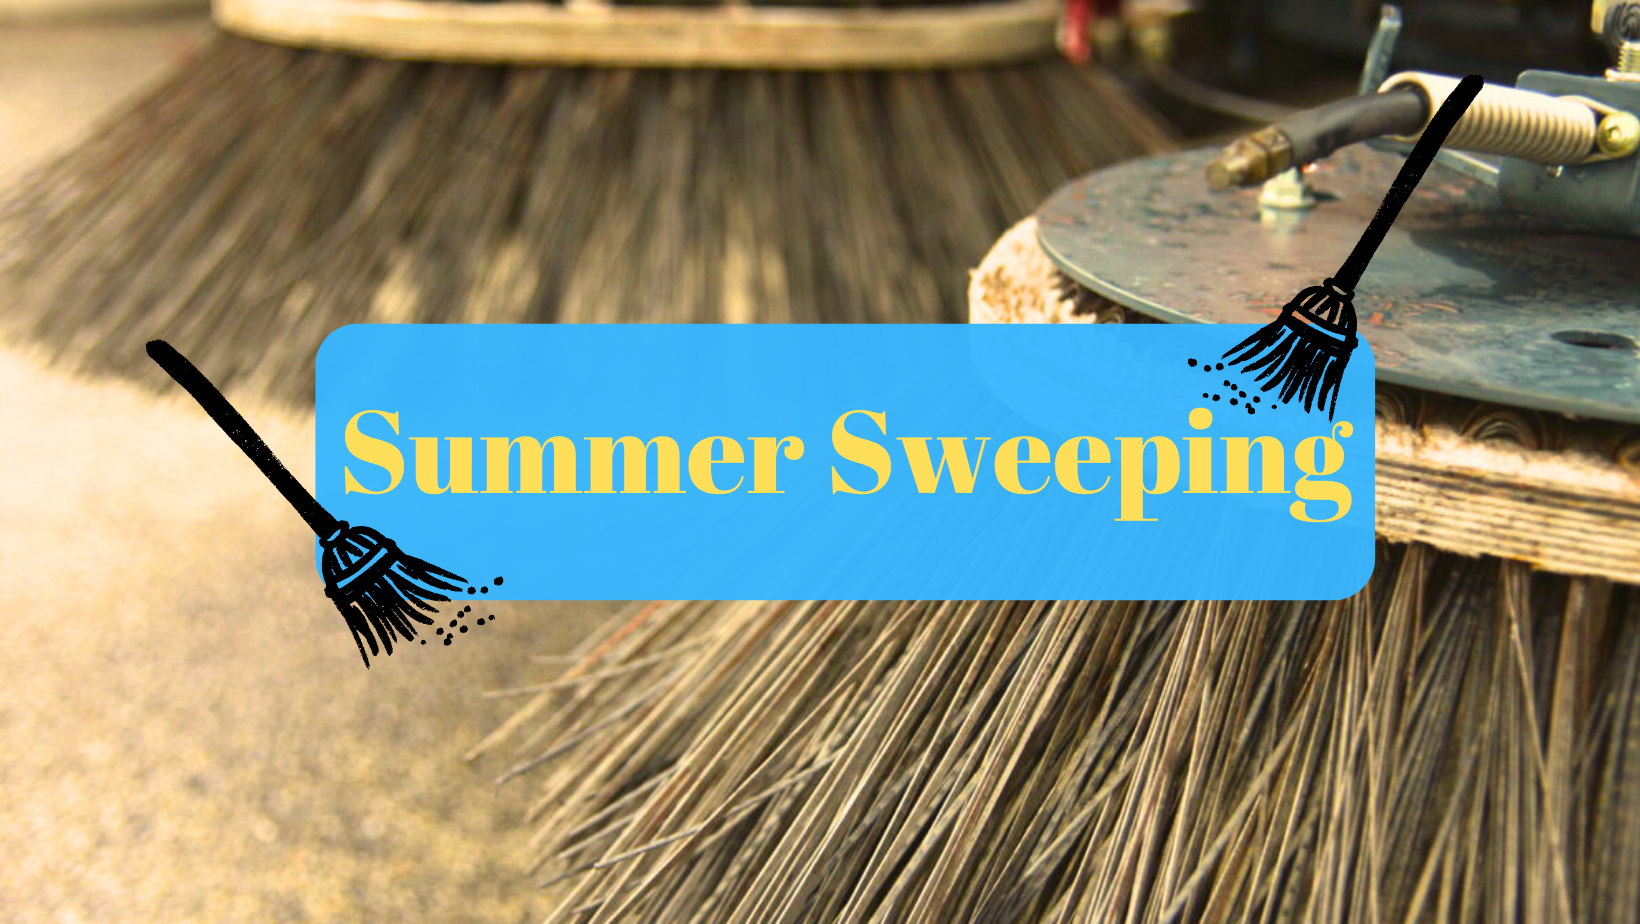 A photo of sweepers with two little cartoon brooms and the text "Summer Sweeping"